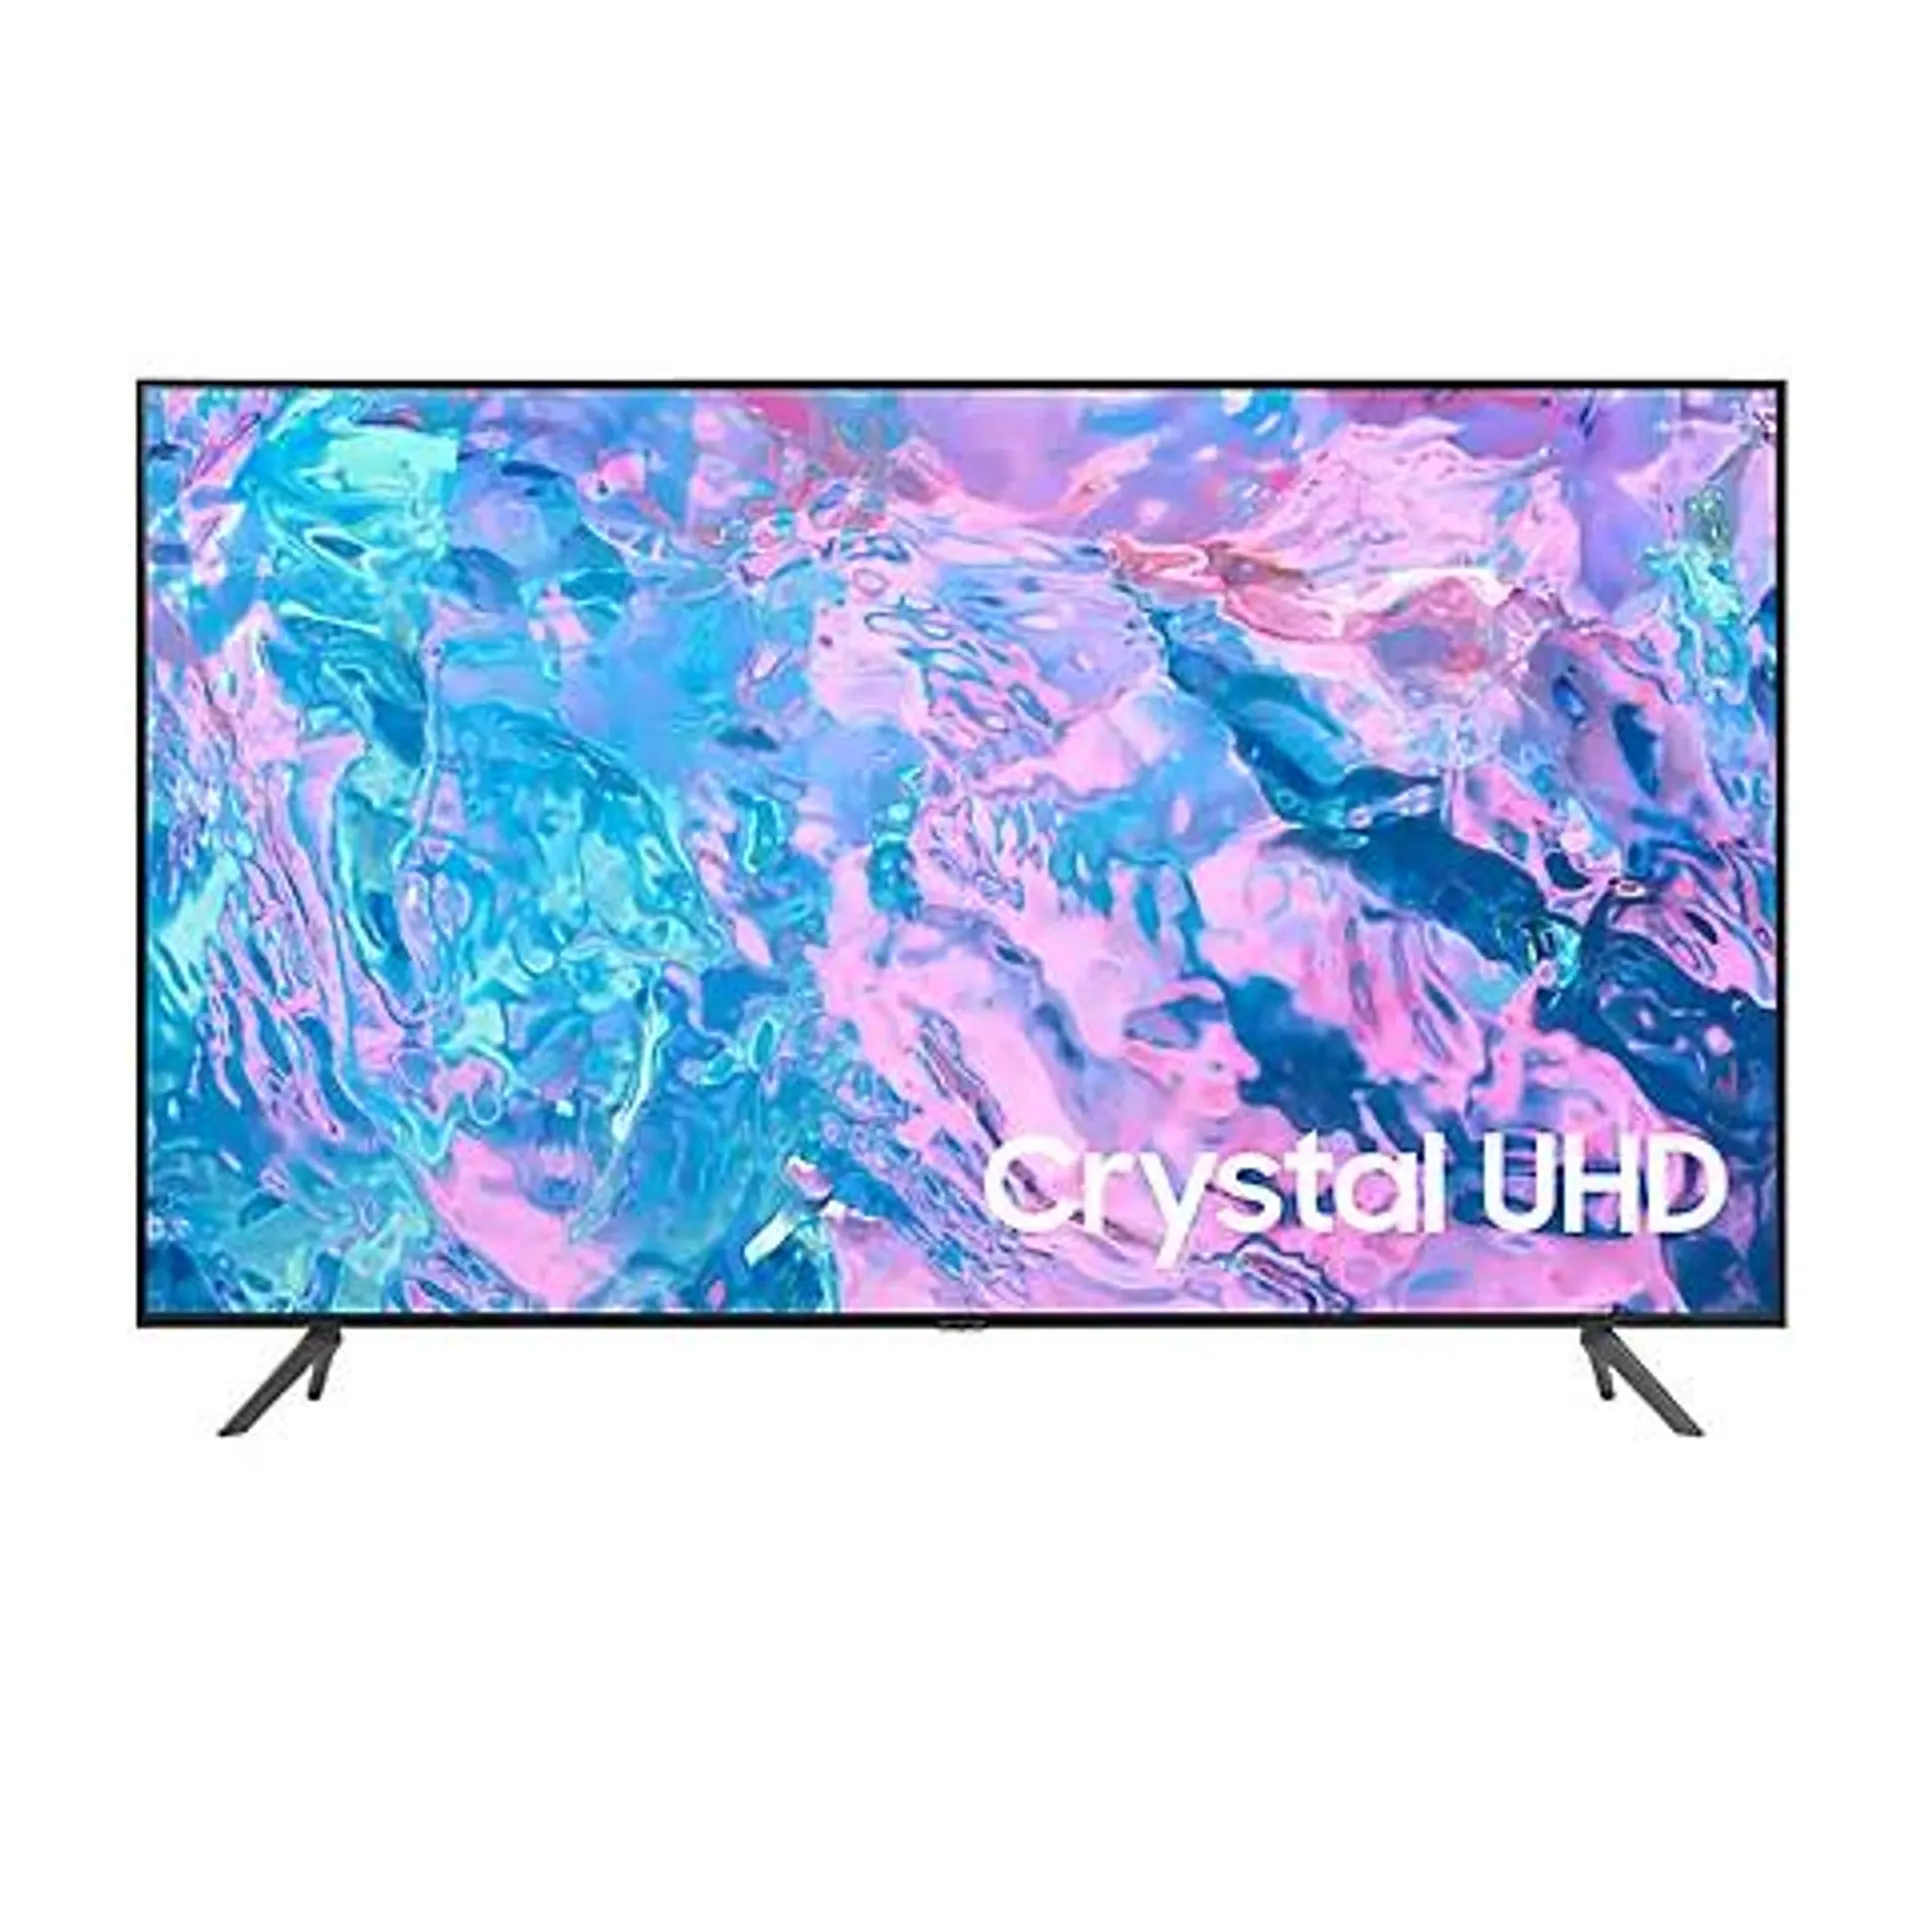 Samsung 75" CU7000 Crystal UHD 4K Smart TV with 4-Year Coverage